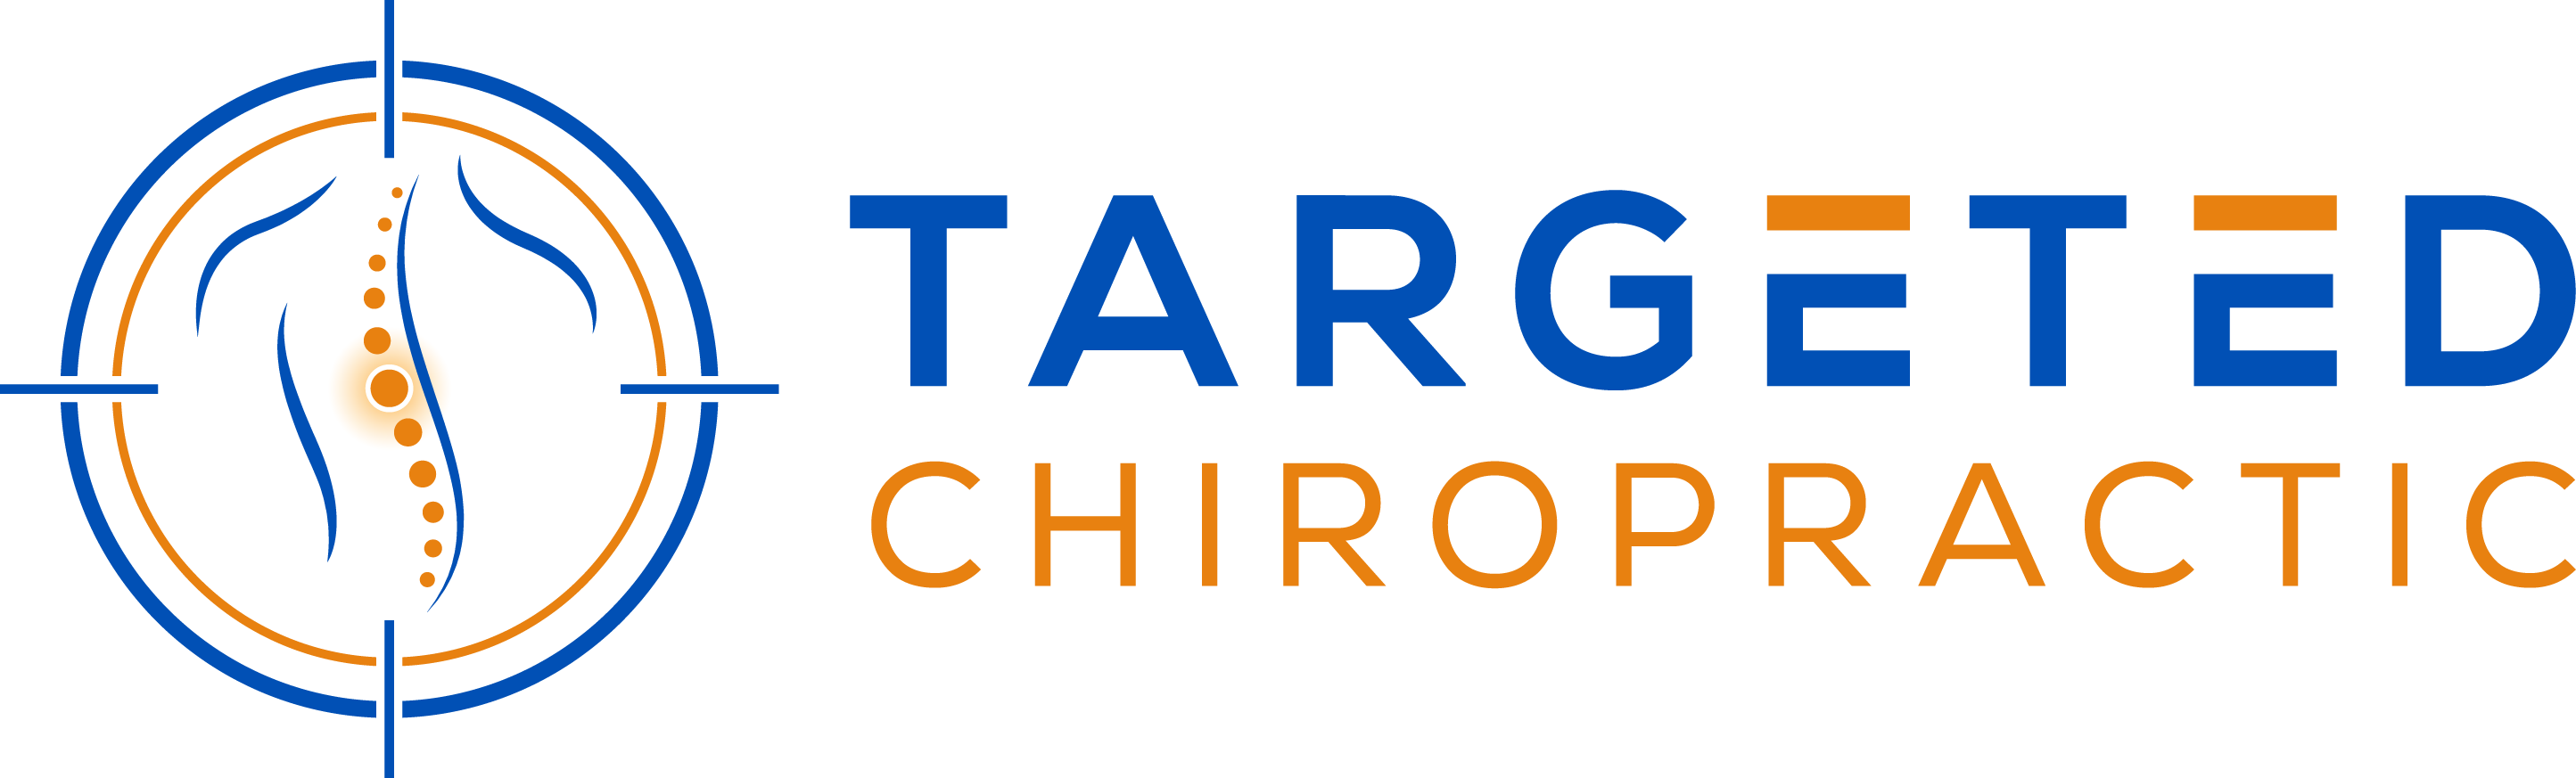 Targeted Chiropractic